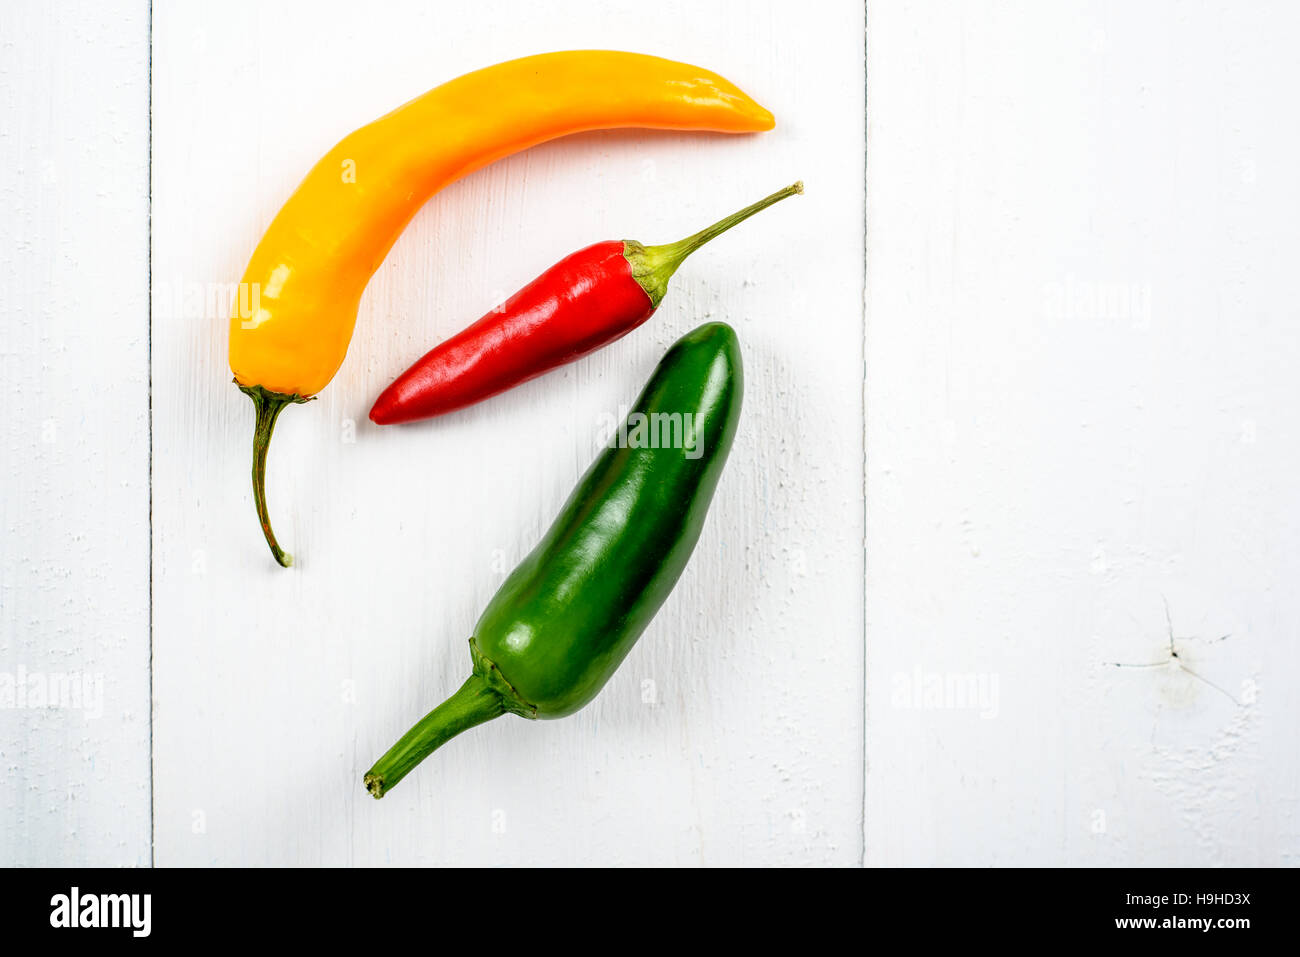 Yellow, Red And Green Chili Pepper On White Stock Photo